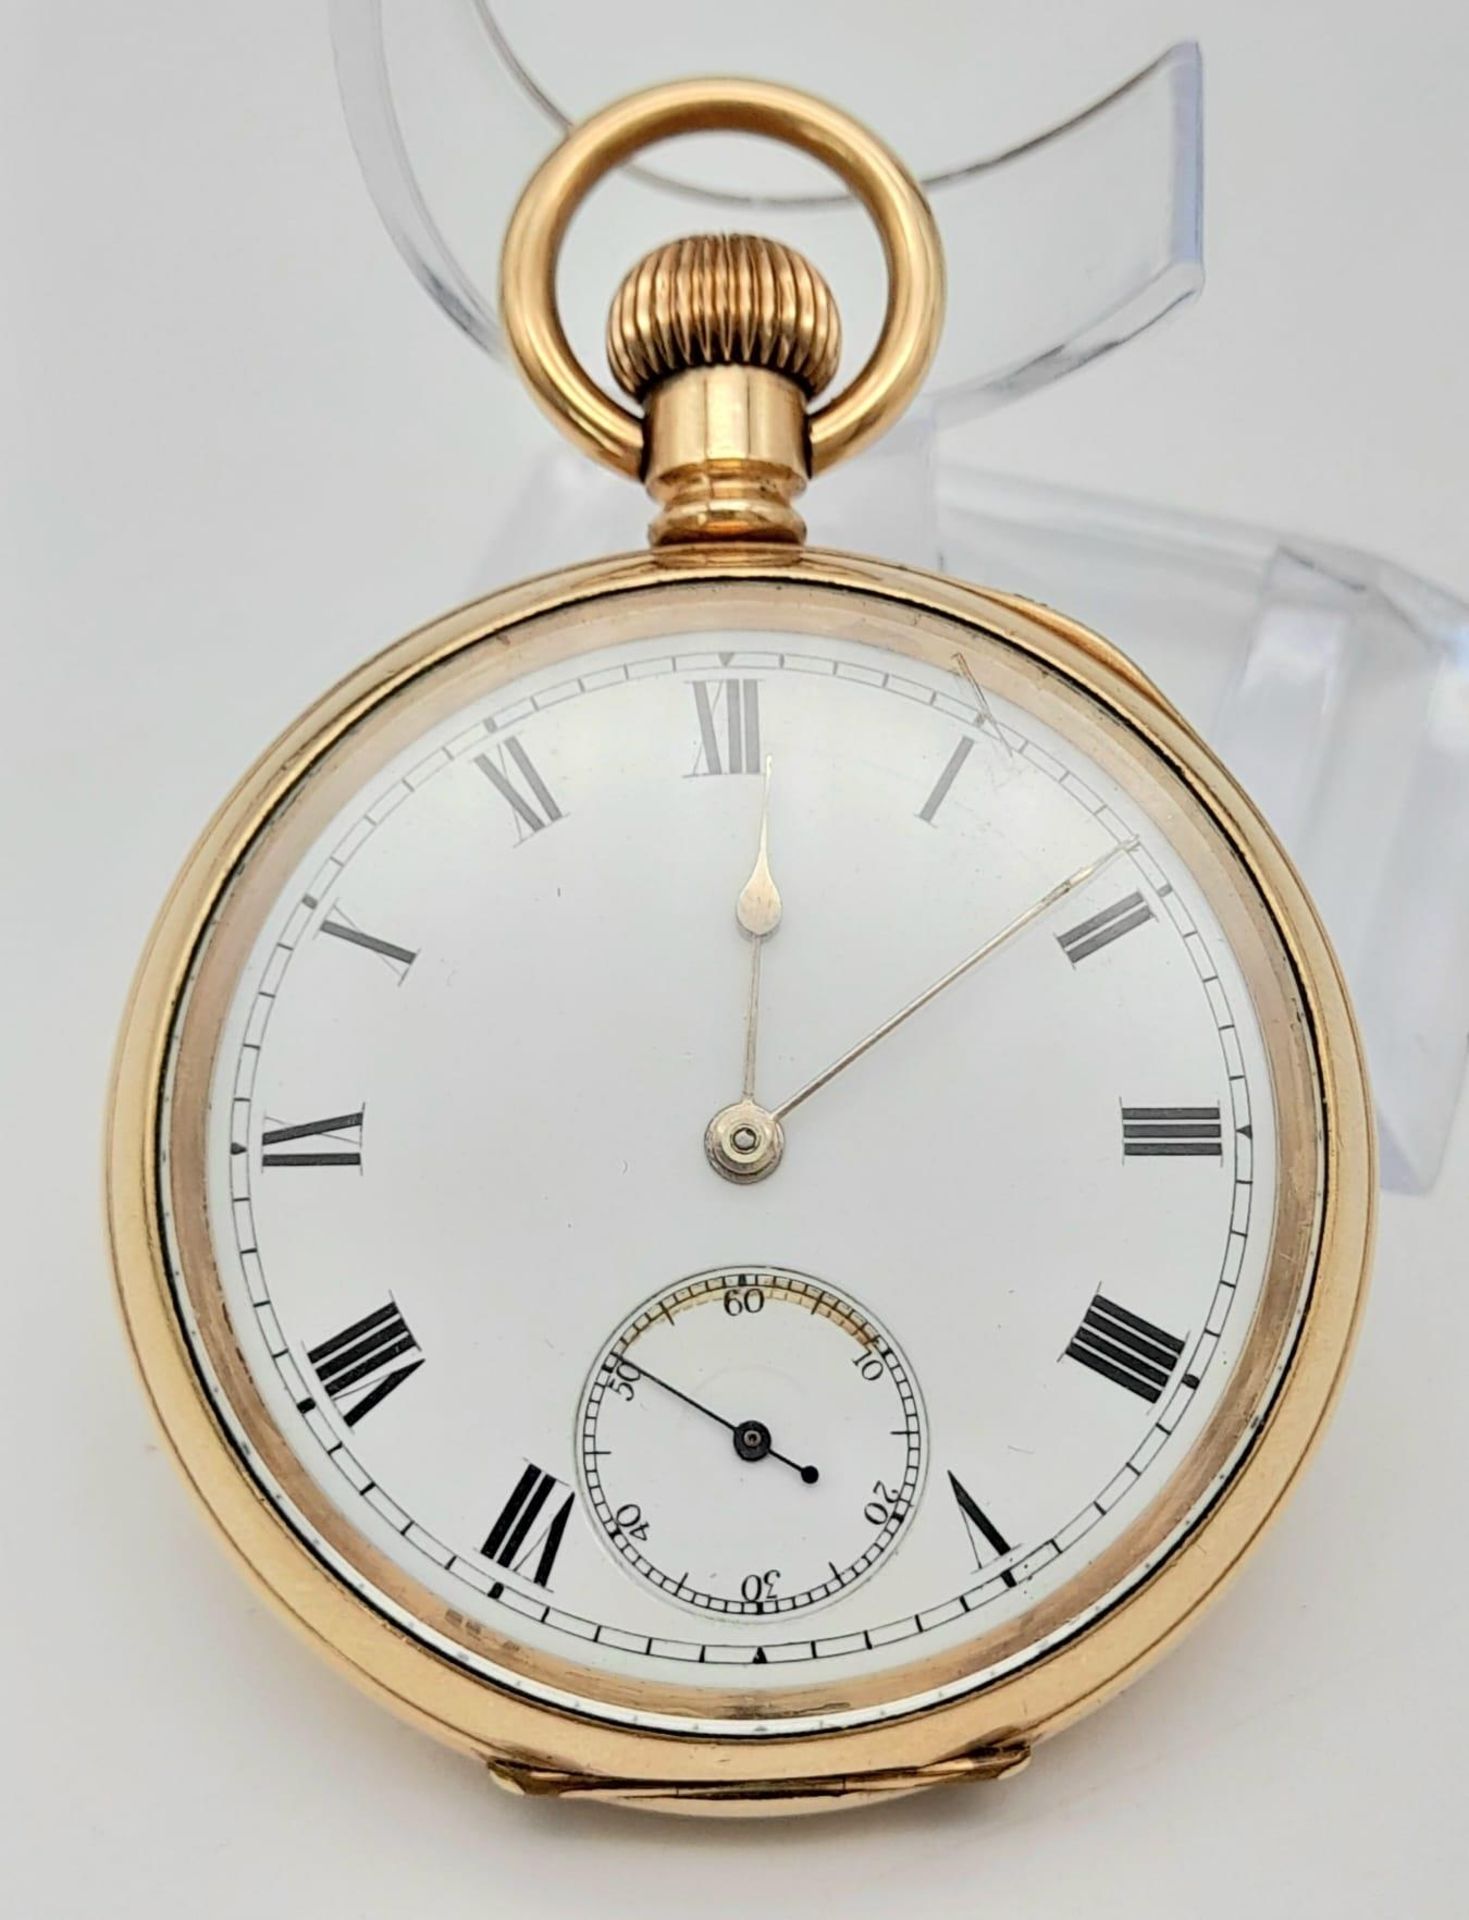 A Vintage Possibly Antique Gold Plated USA Waltham Traveller Pocket Watch. White dial with second